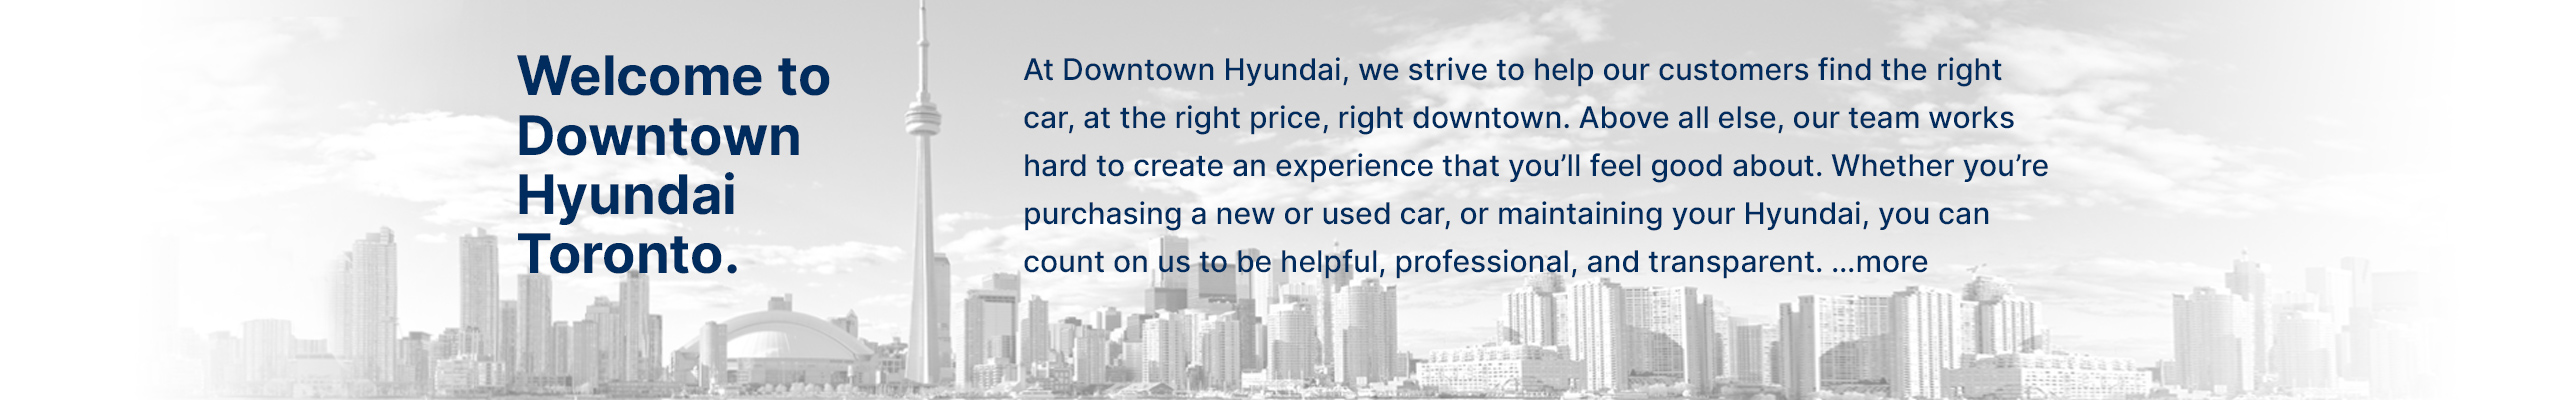 Welcome to Downtown Hyundai, located in Toronto, ON.